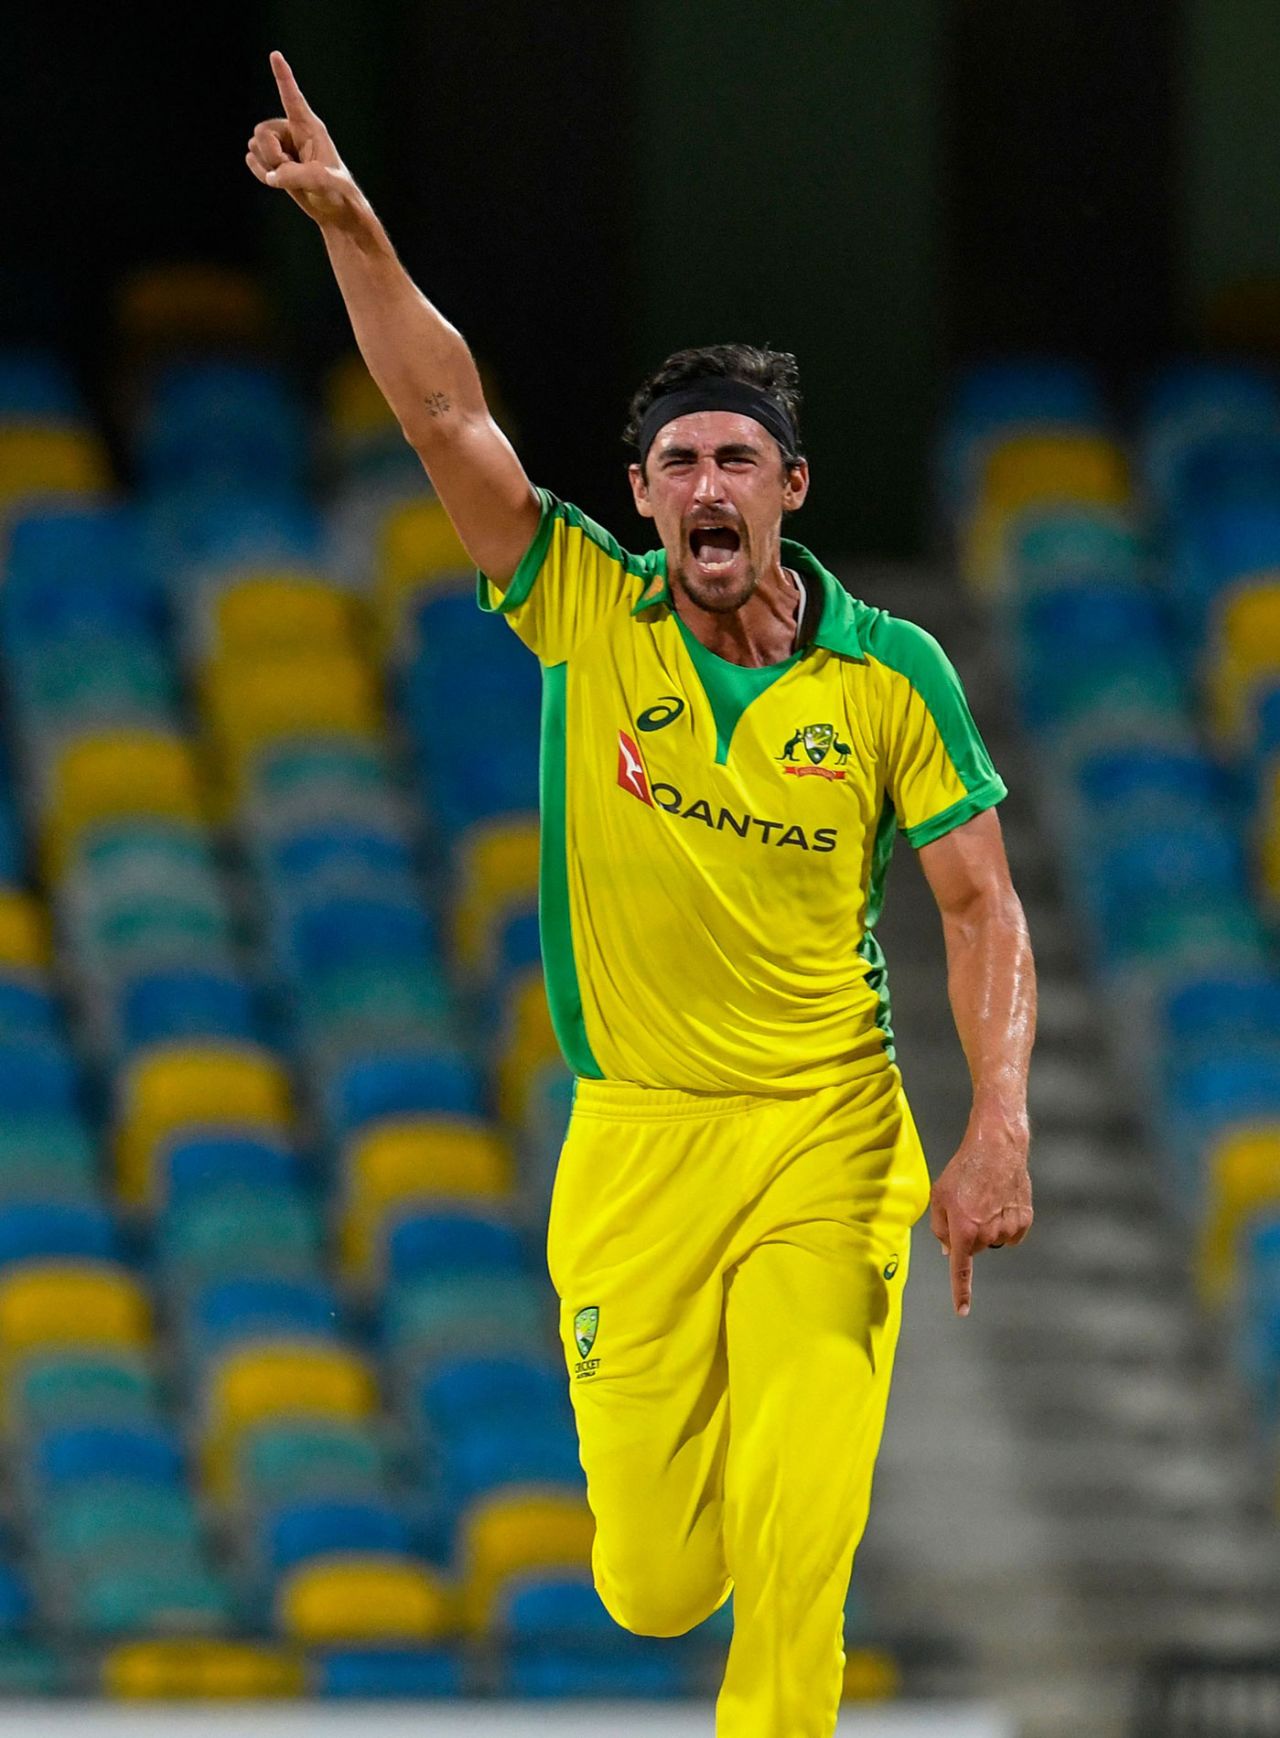 Mitchell Starc again made inroads with the new ball, West Indies vs Australia, 2nd ODI, Barbados, July 24, 2021